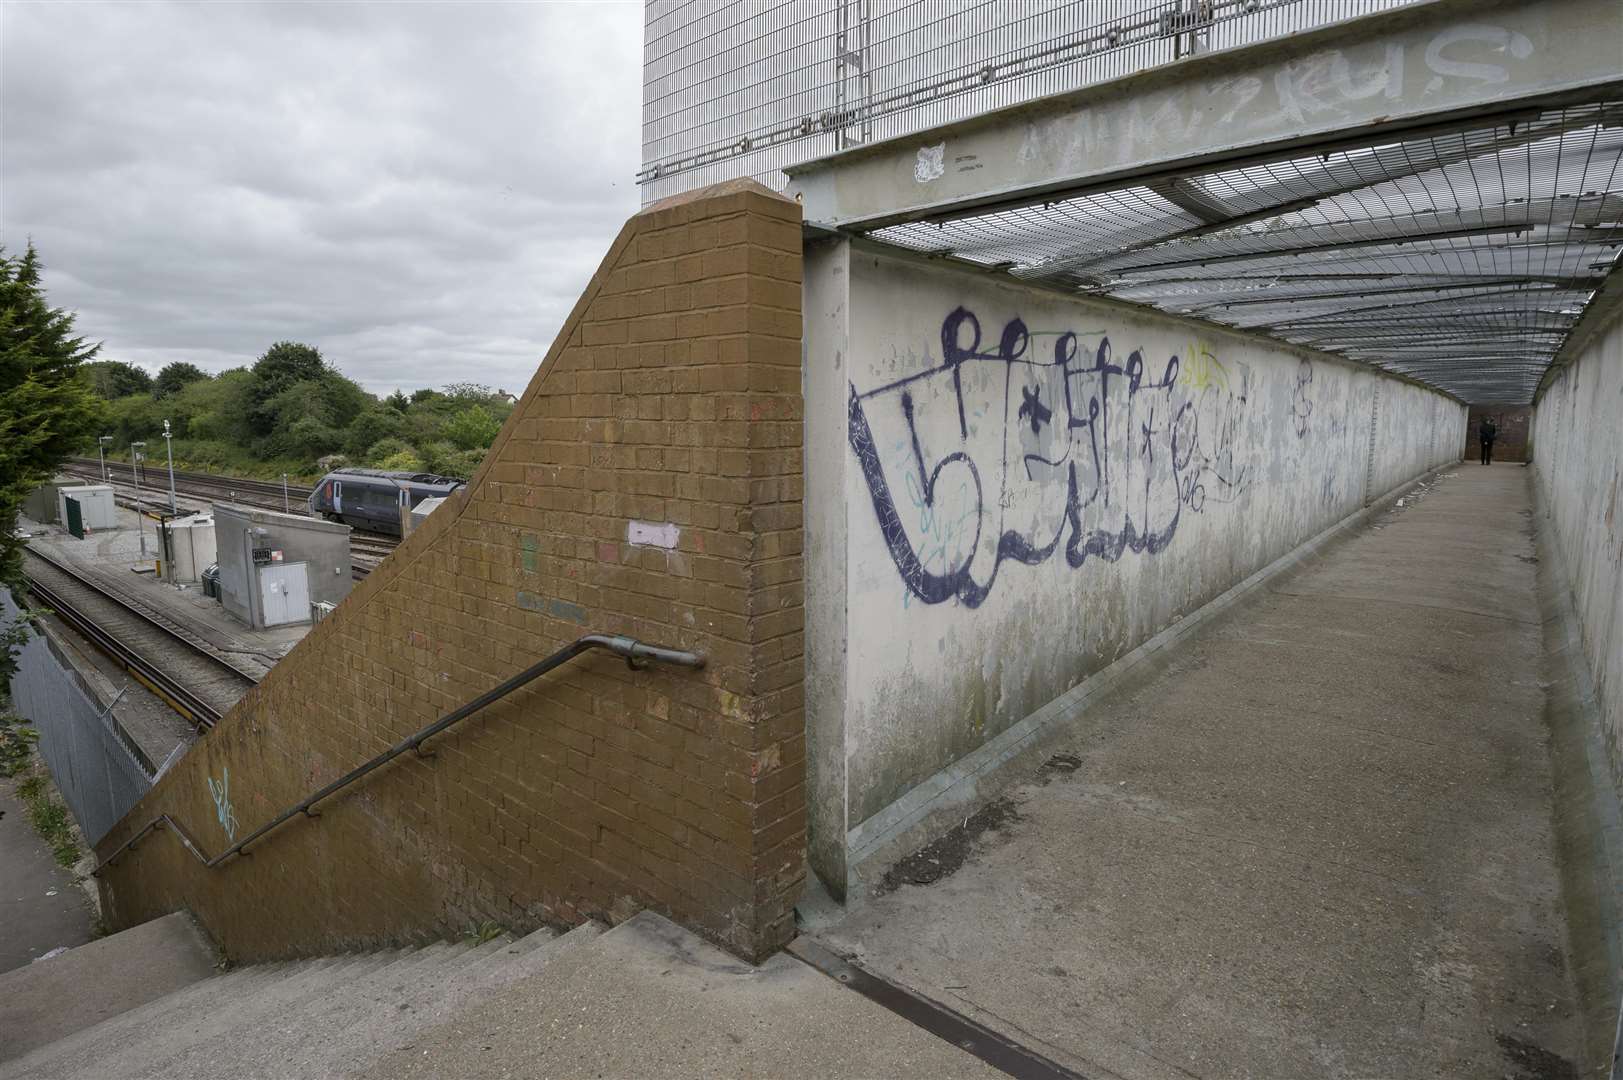 The footbridge where a young woman was attacked